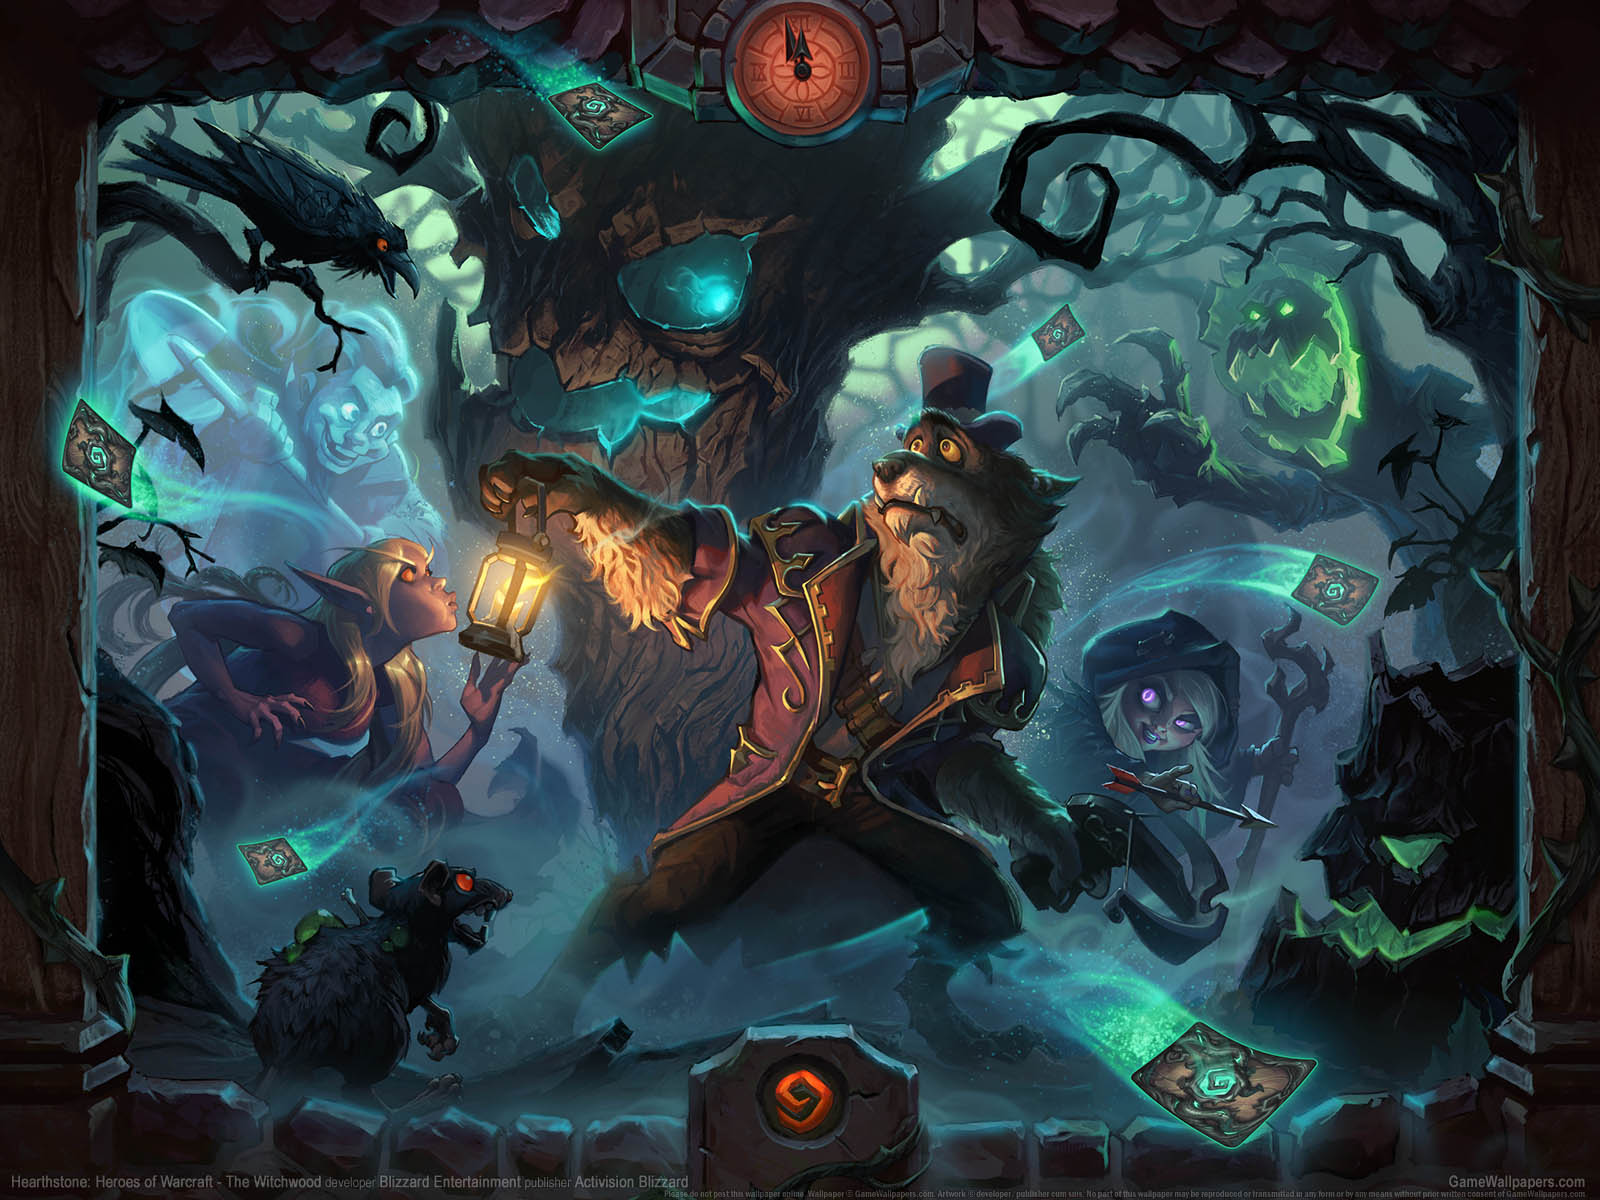 Hearthstone: Heroes of Warcraft - The Witchwood achtergrond 01 1600x1200